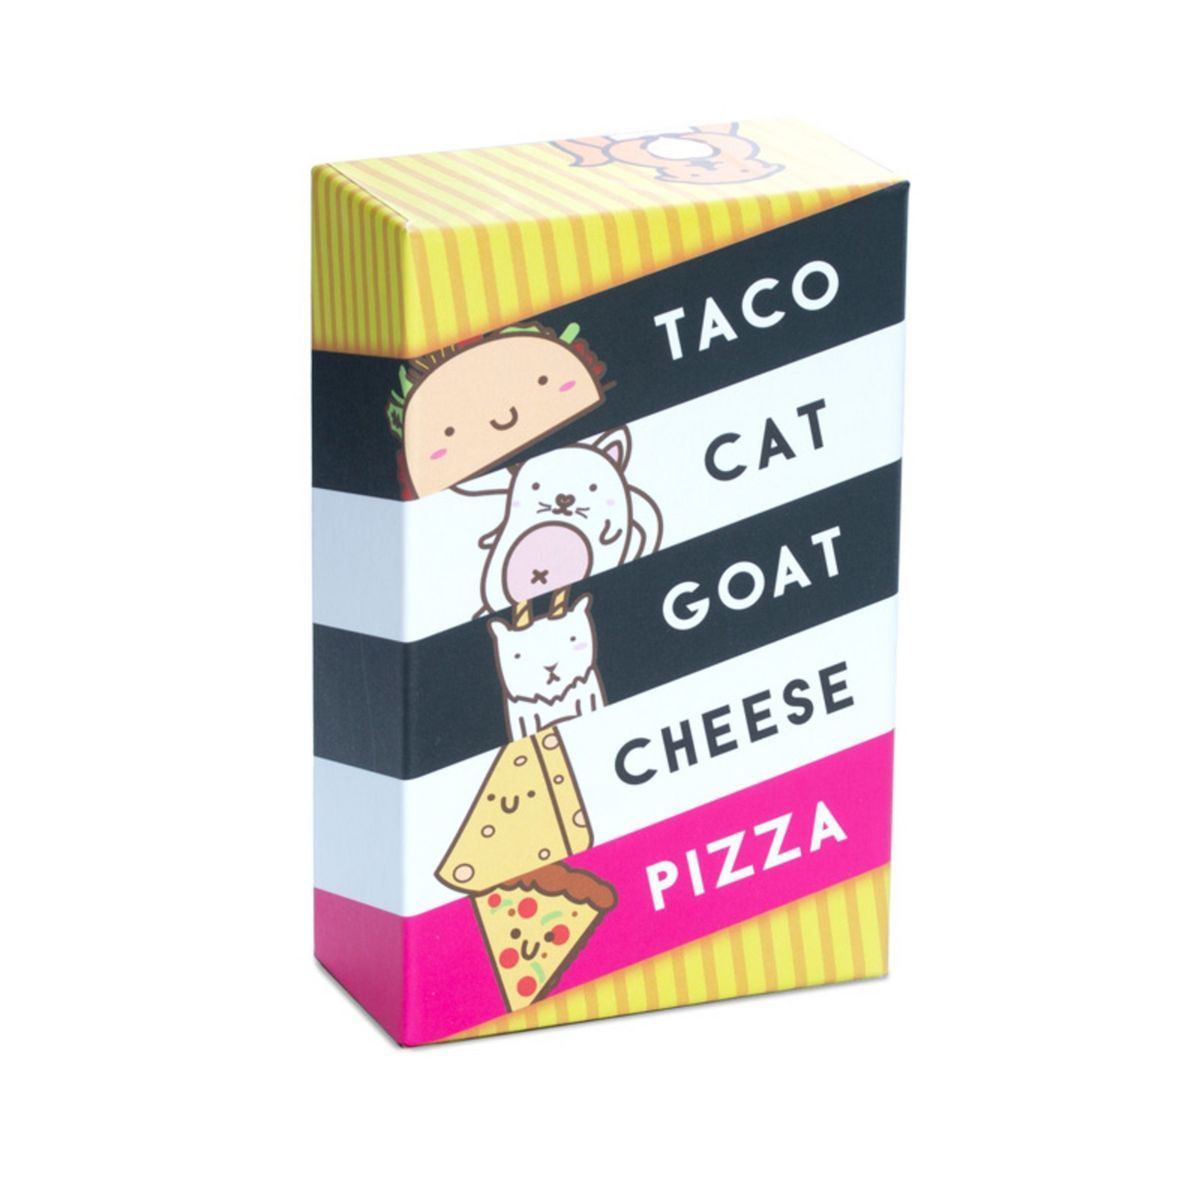 Taco Cat Goat Cheese Pizza Card Game | Target